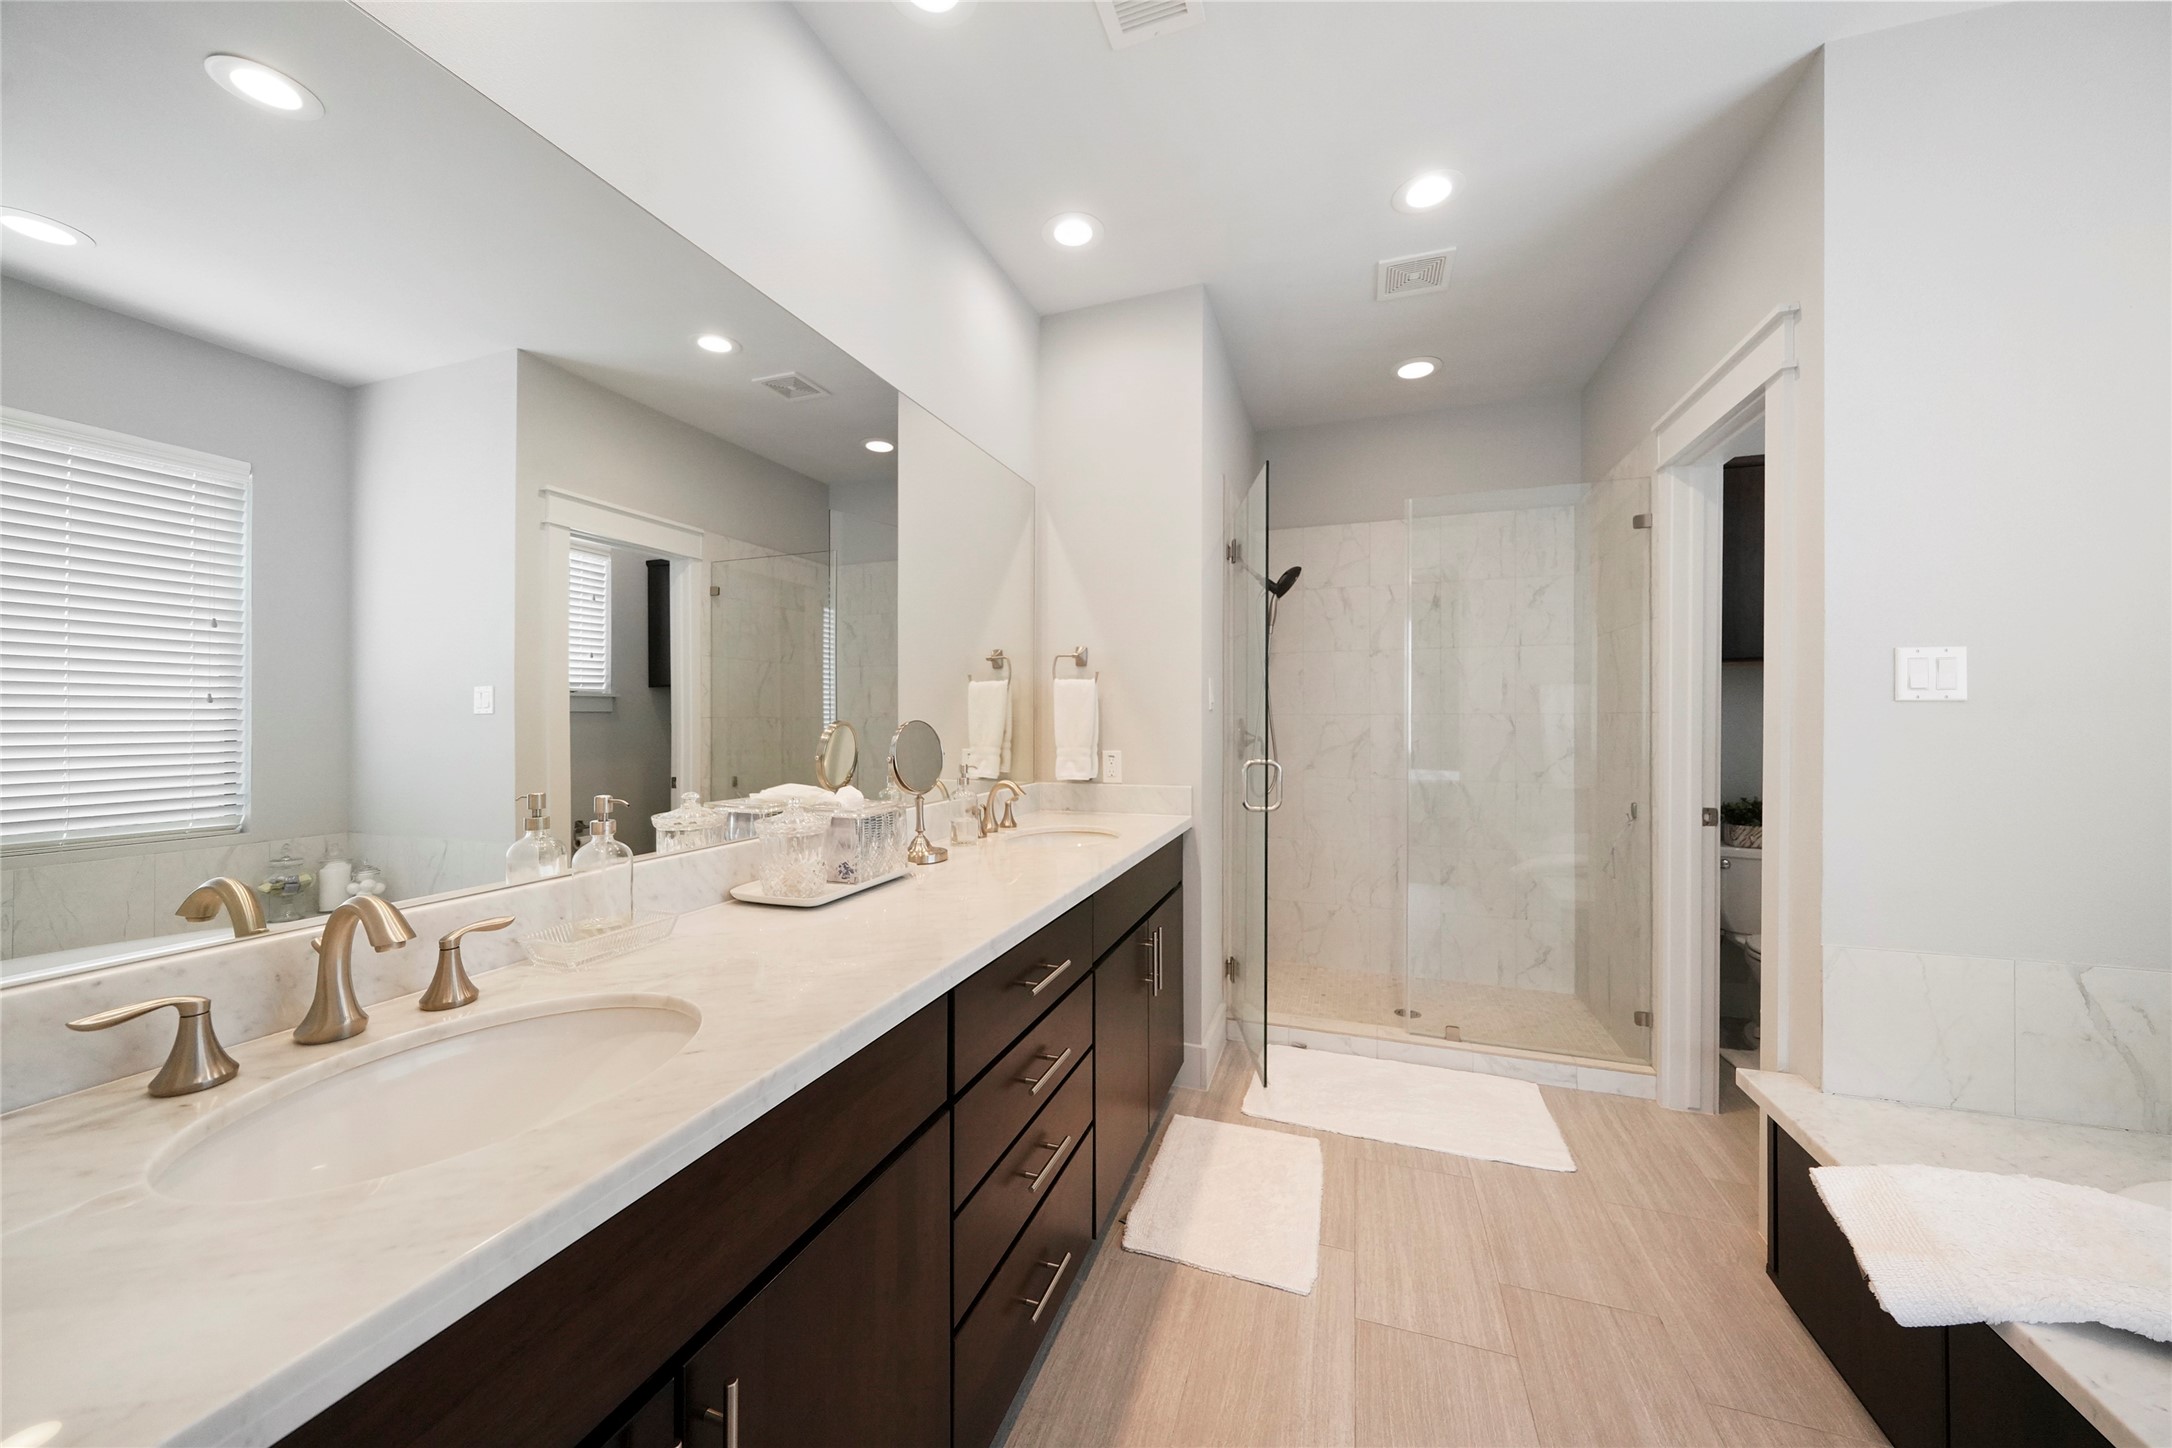 Looking for a large spa Primary Bath....look no further. Double sinks, ample counter space and storage, plus a large walk-in glass enclosed shower...........